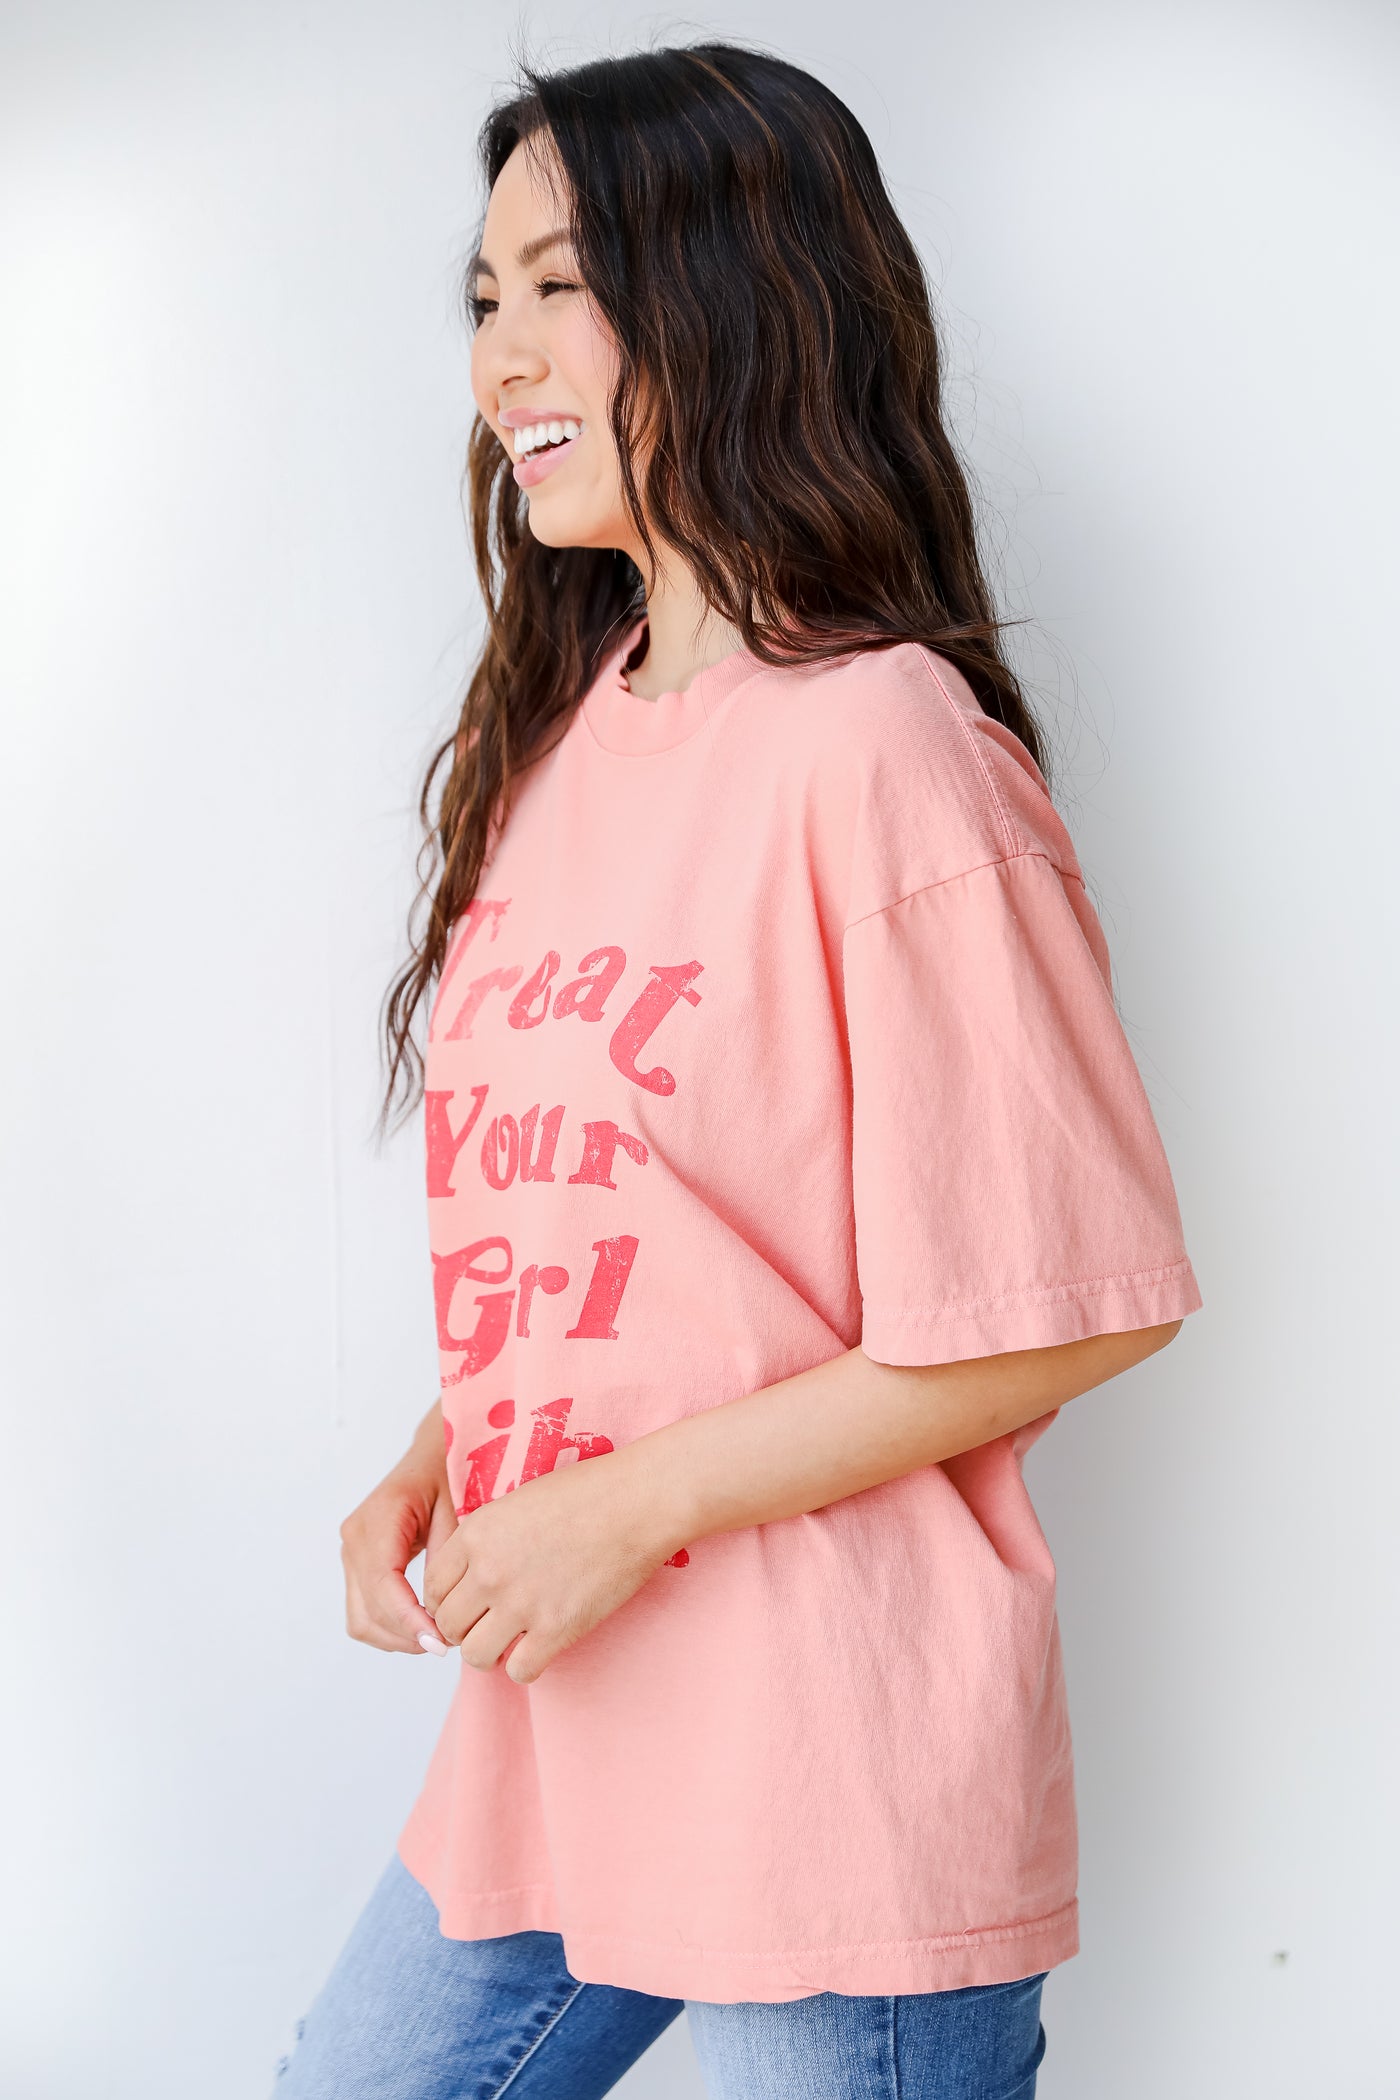 Treat Your Girl Right Graphic Tee side view